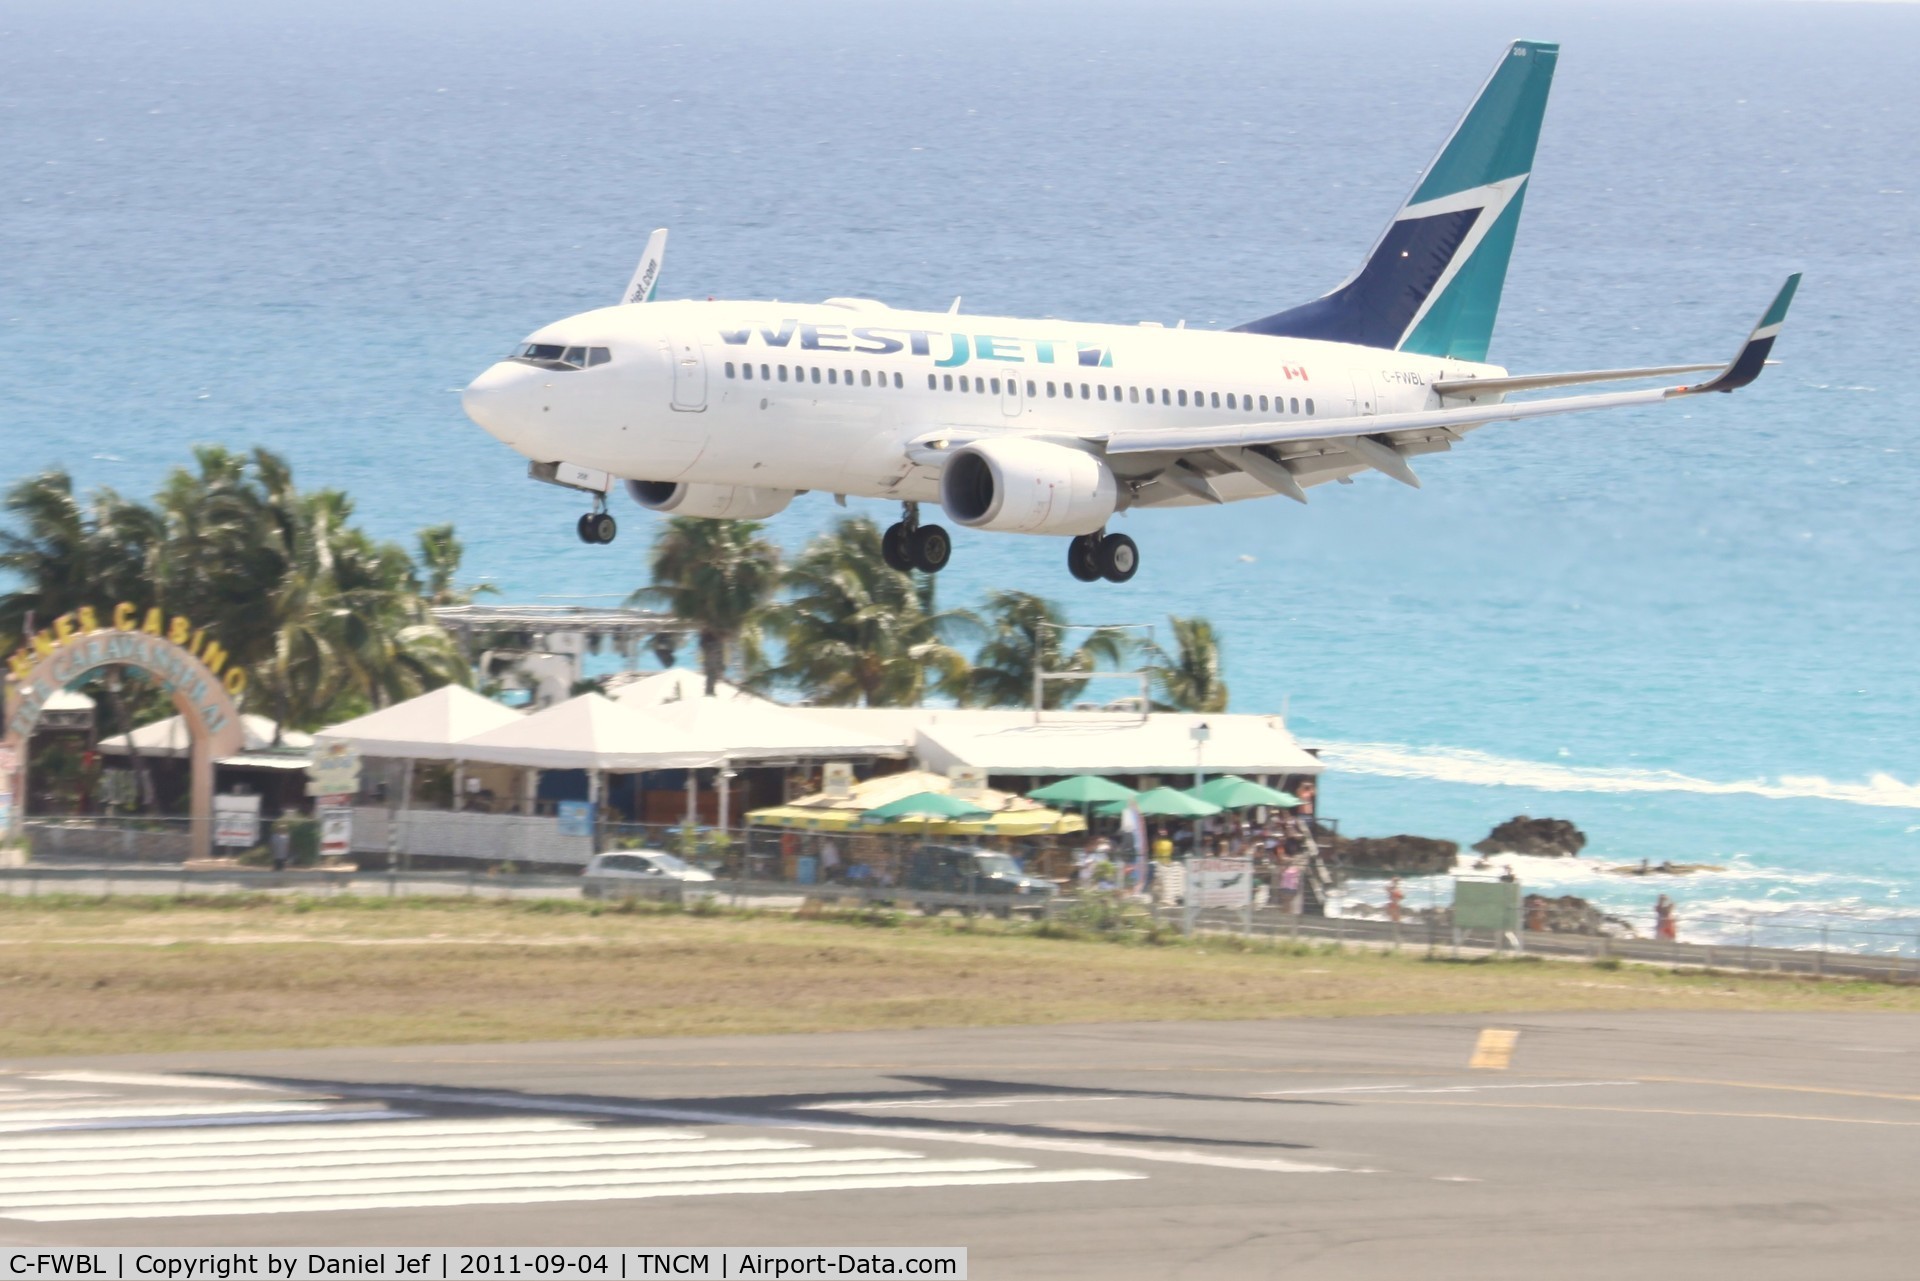 C-FWBL, 2003 Boeing 737-7CT C/N 32750, Canjet over Maho beach at TNCM